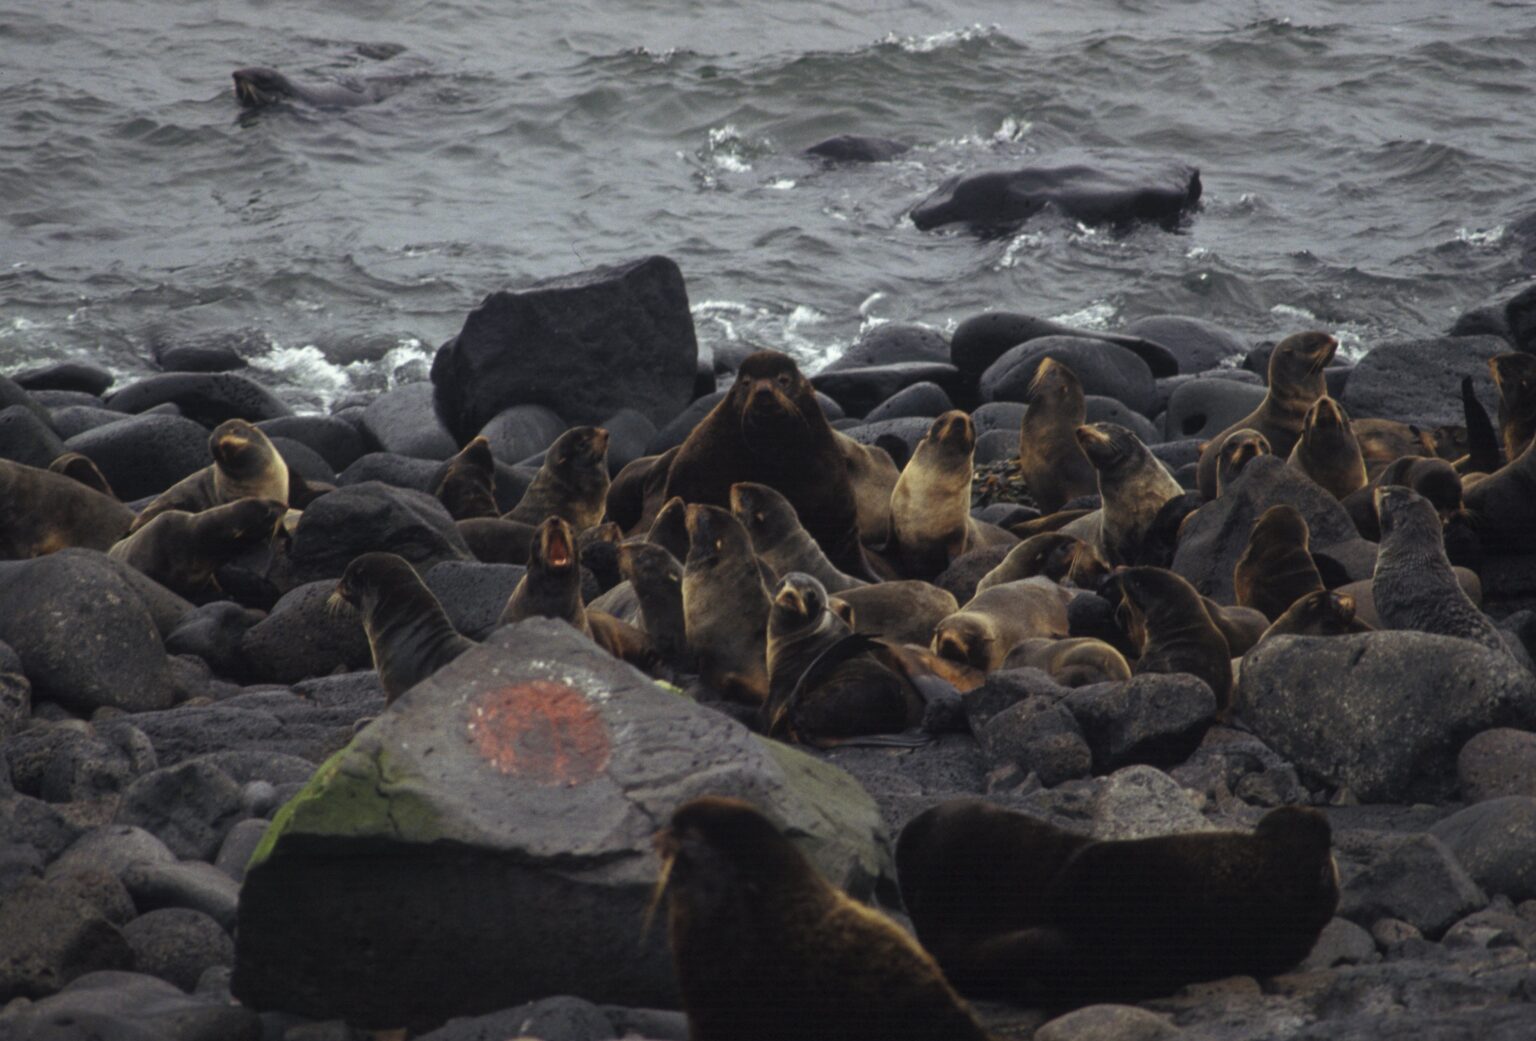 Several fur seals of all ages lounging on a rocky beach on St. Paul Island